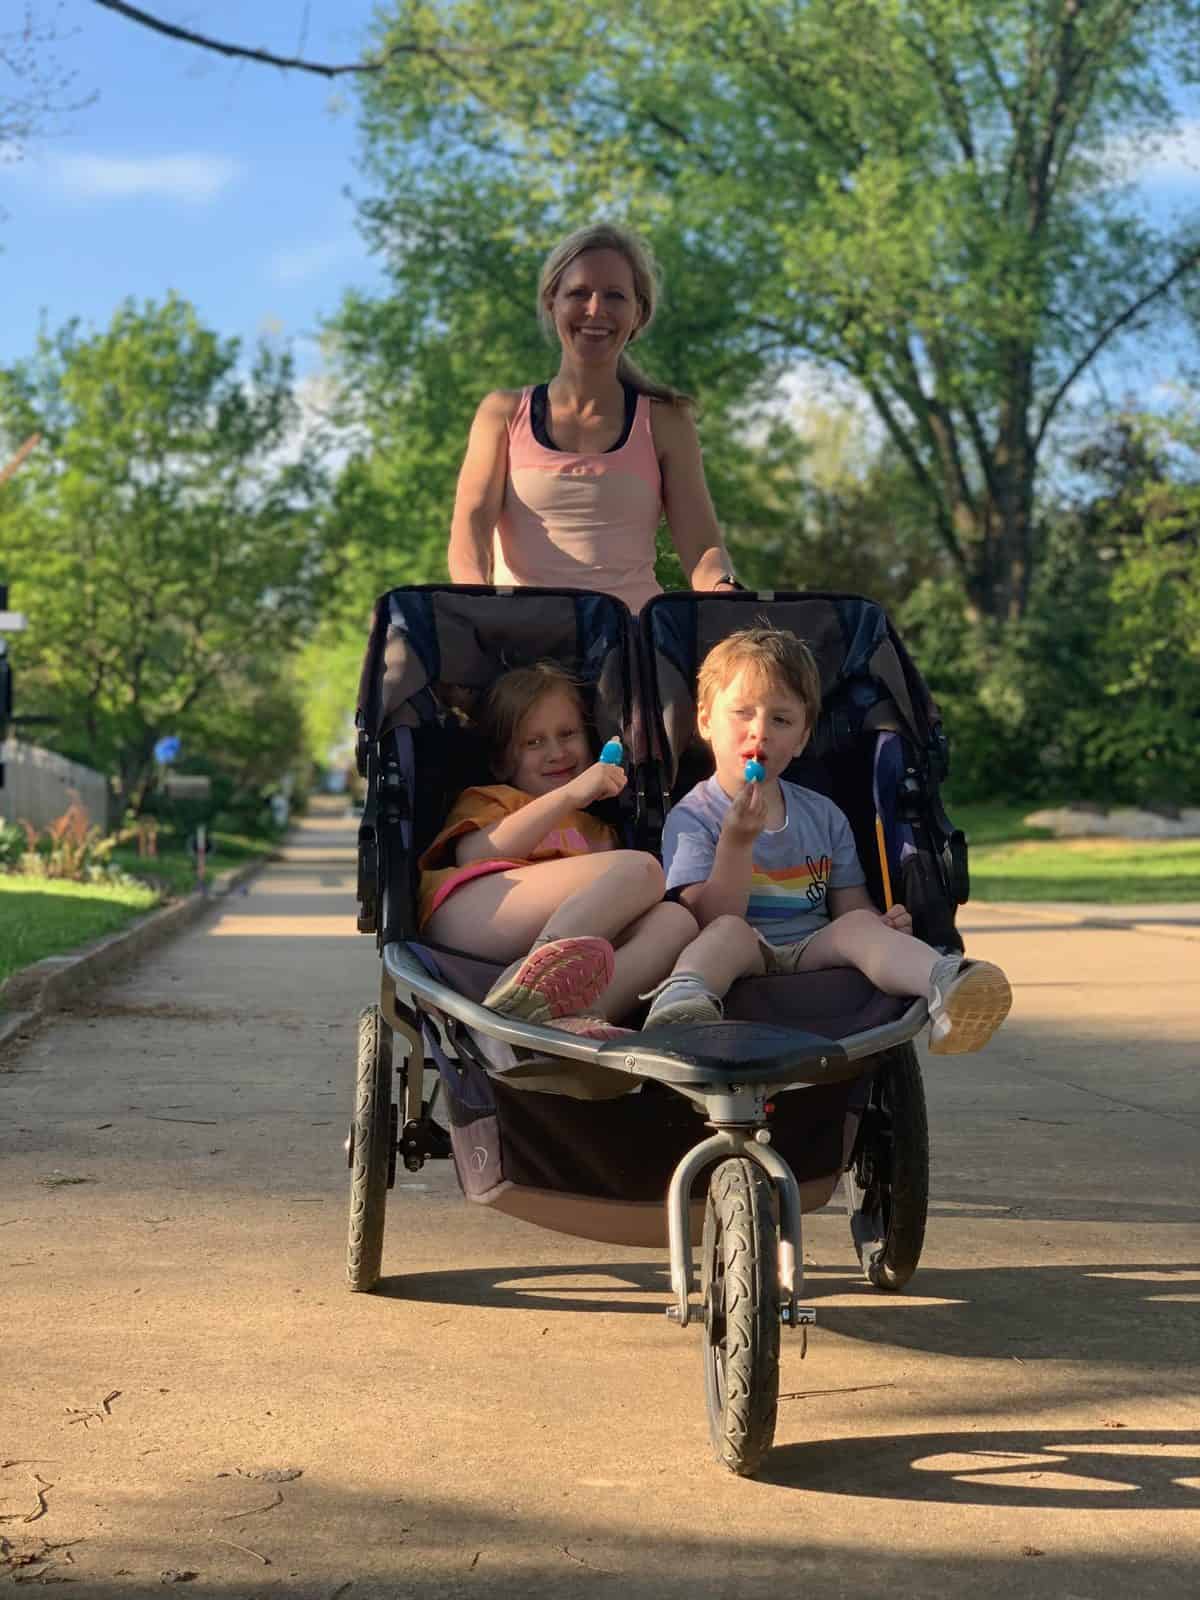 Whitney Heins, of Mother Runners, with her kids in the running stroller.